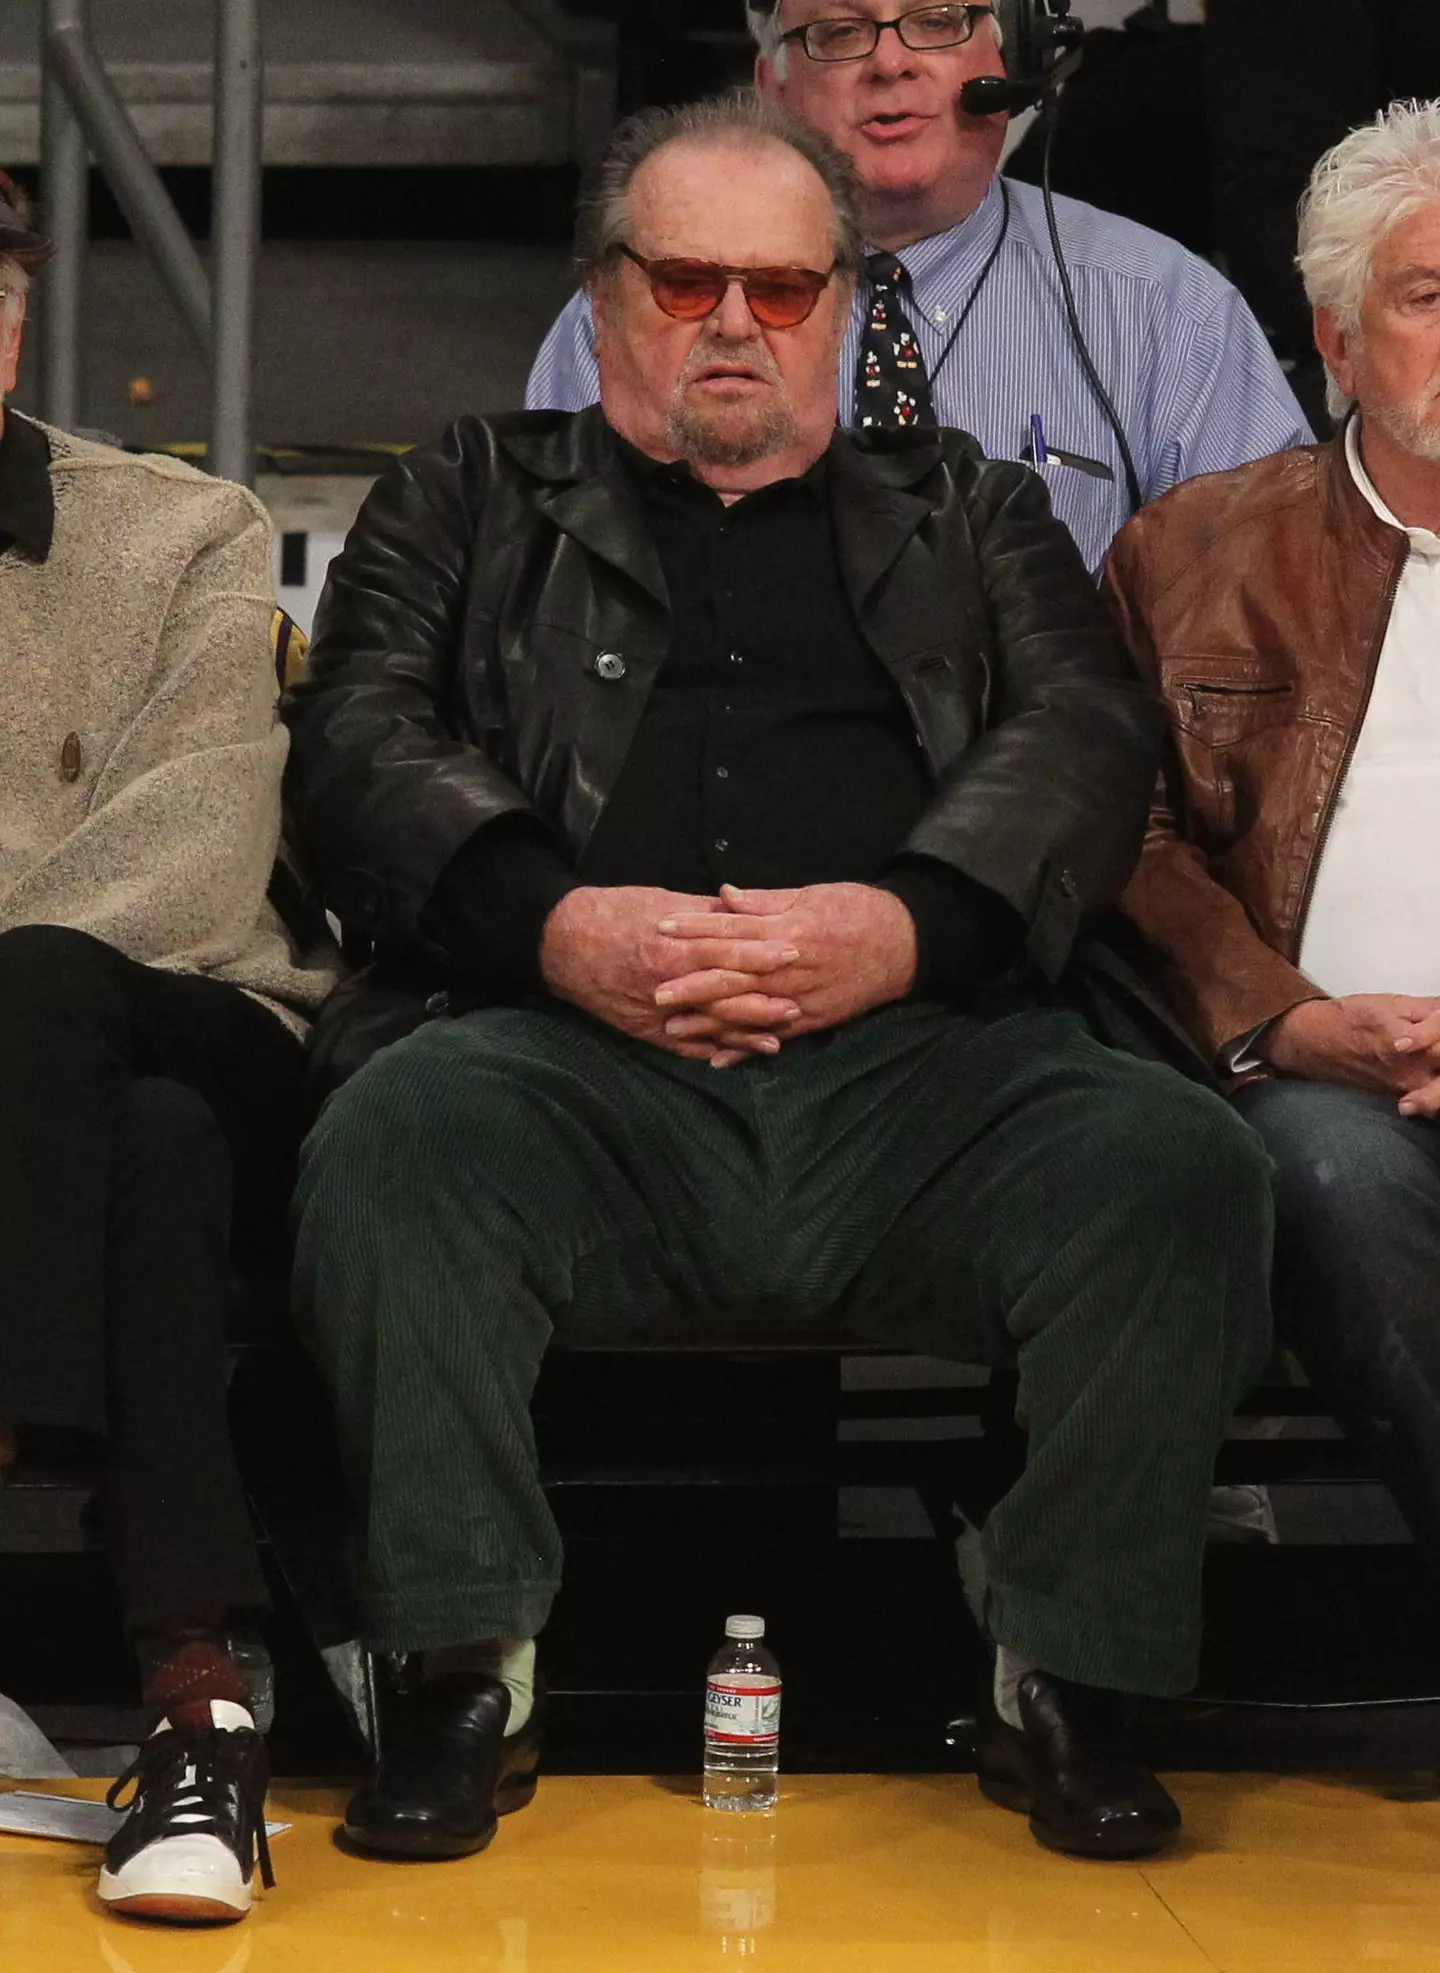 Jack Nicholson pictured at a basketball game a few years ago.